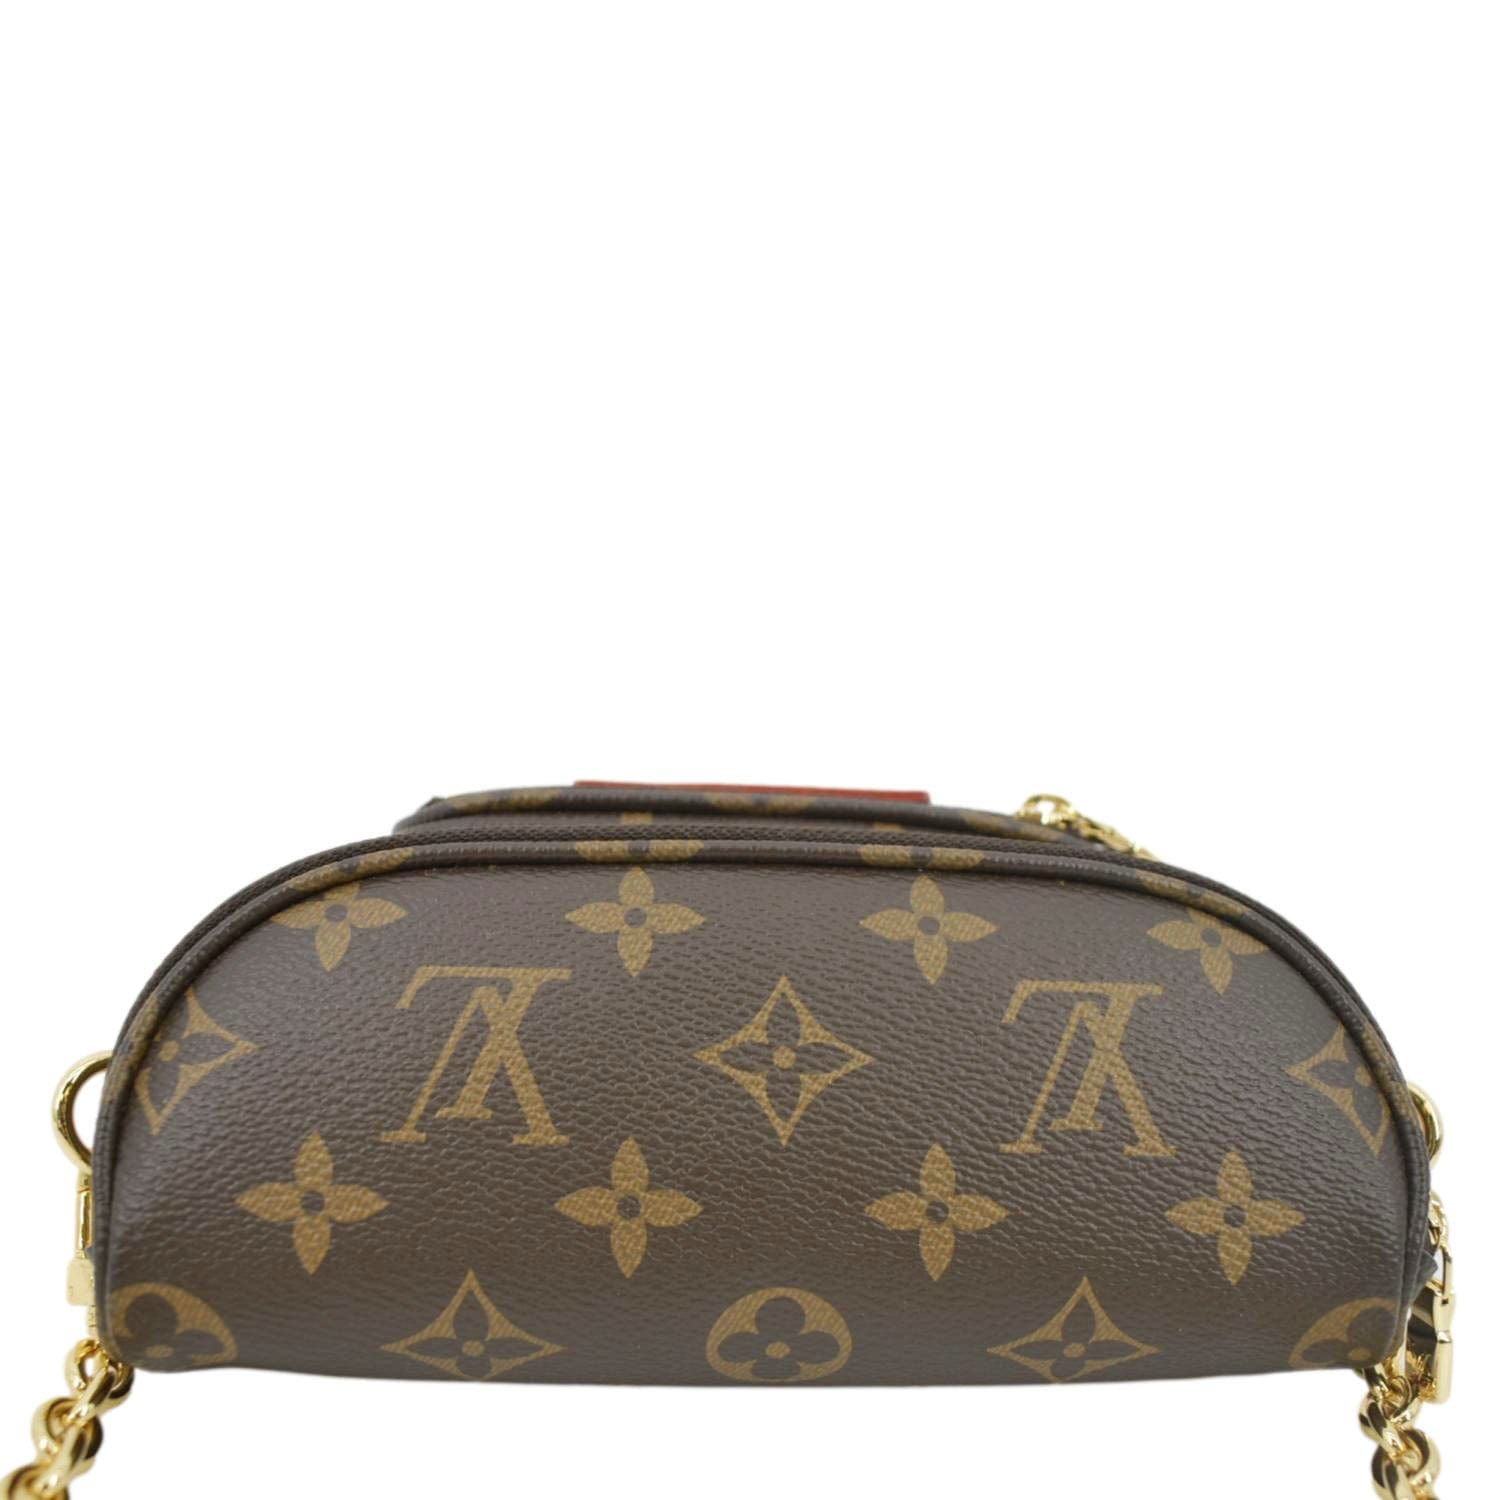 WAYS to use GOLD CHAIN STRAP from LOUIS VUITTON Mini BumBag